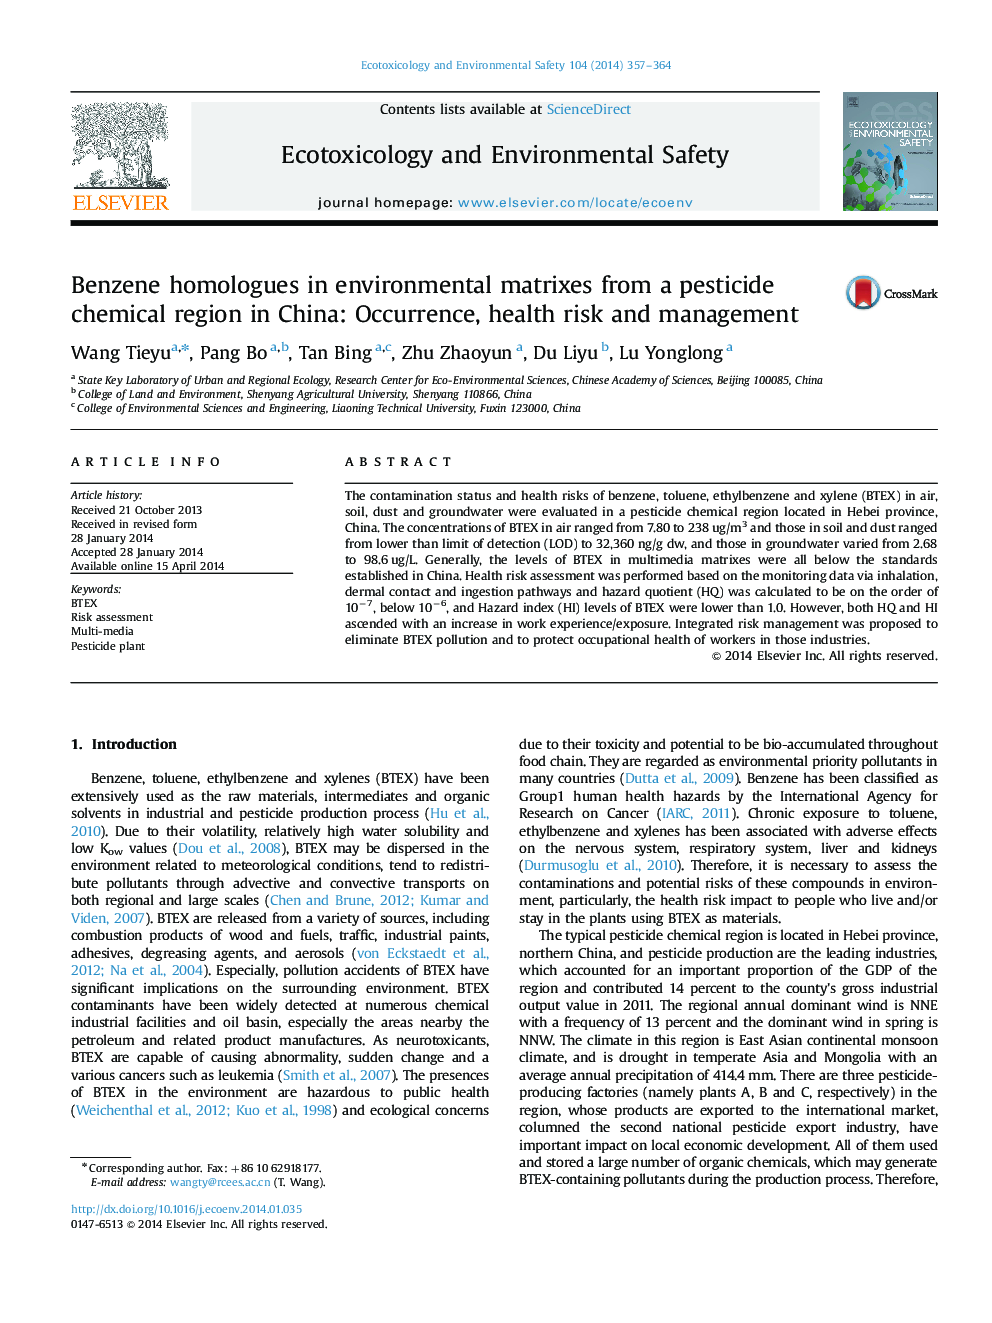 Benzene homologues in environmental matrixes from a pesticide chemical region in China: Occurrence, health risk and management